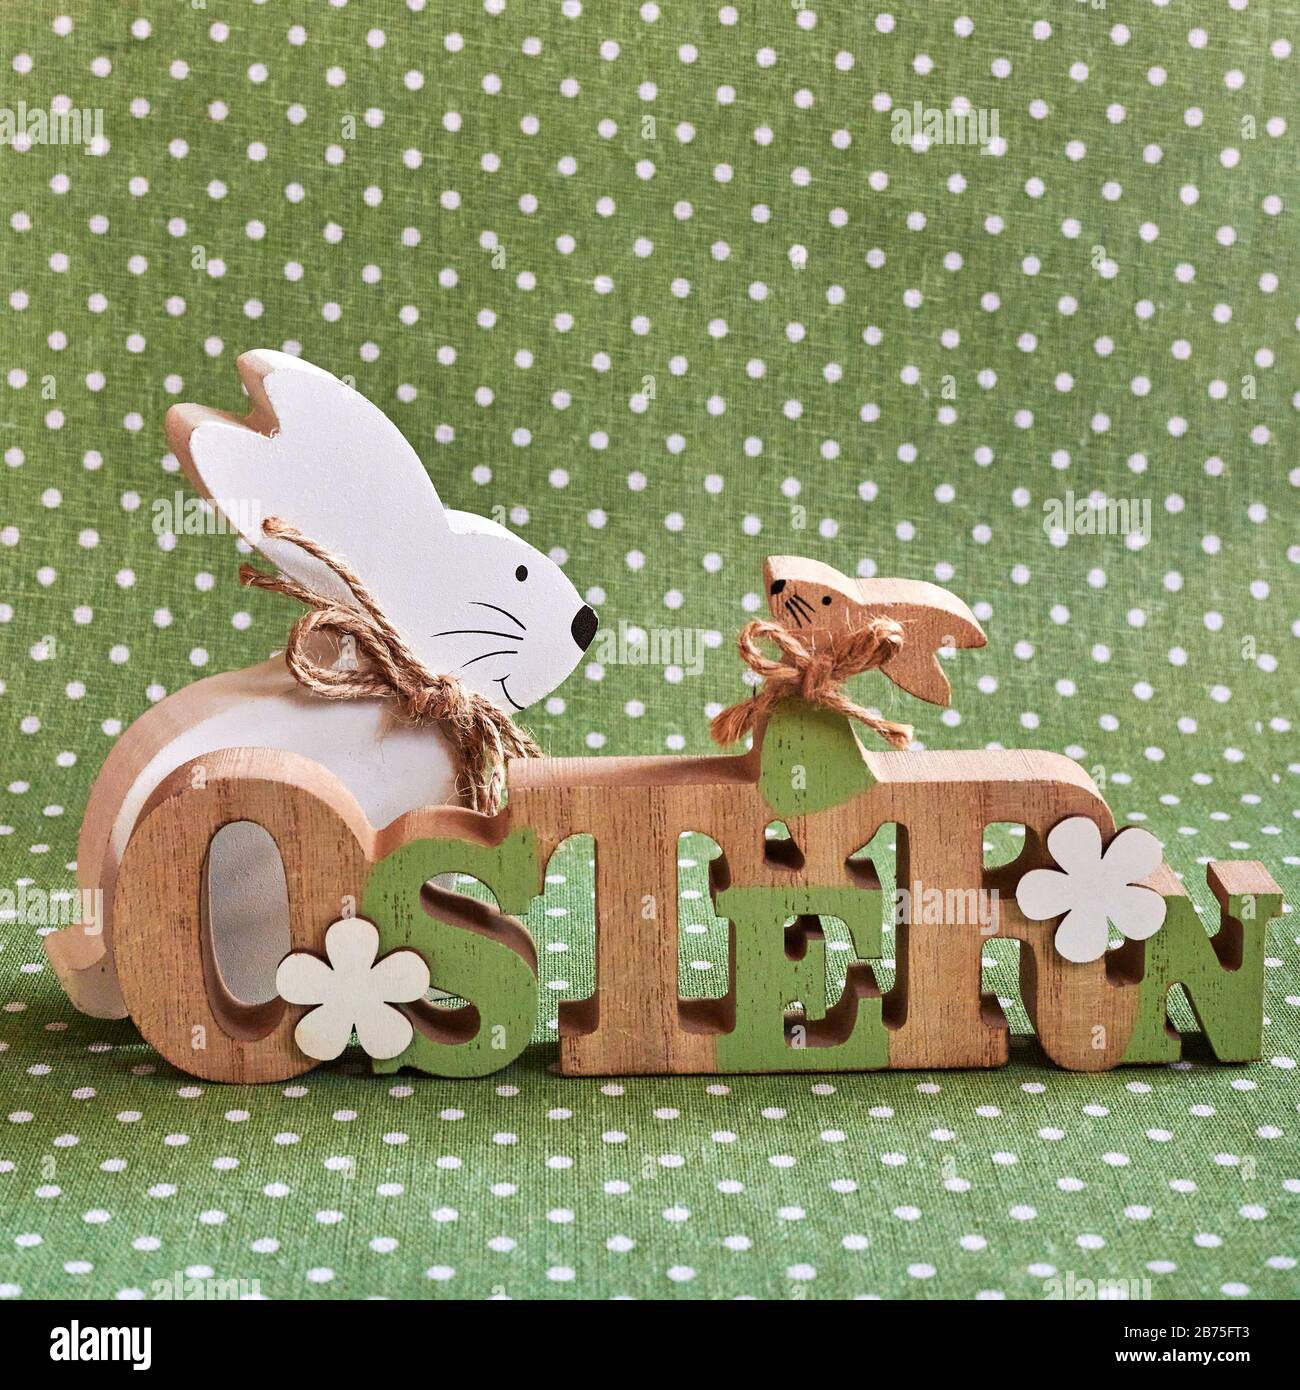 Wooden Easter bunny in front of a green background with white dots. The Text is German for Easter. Stock Photo